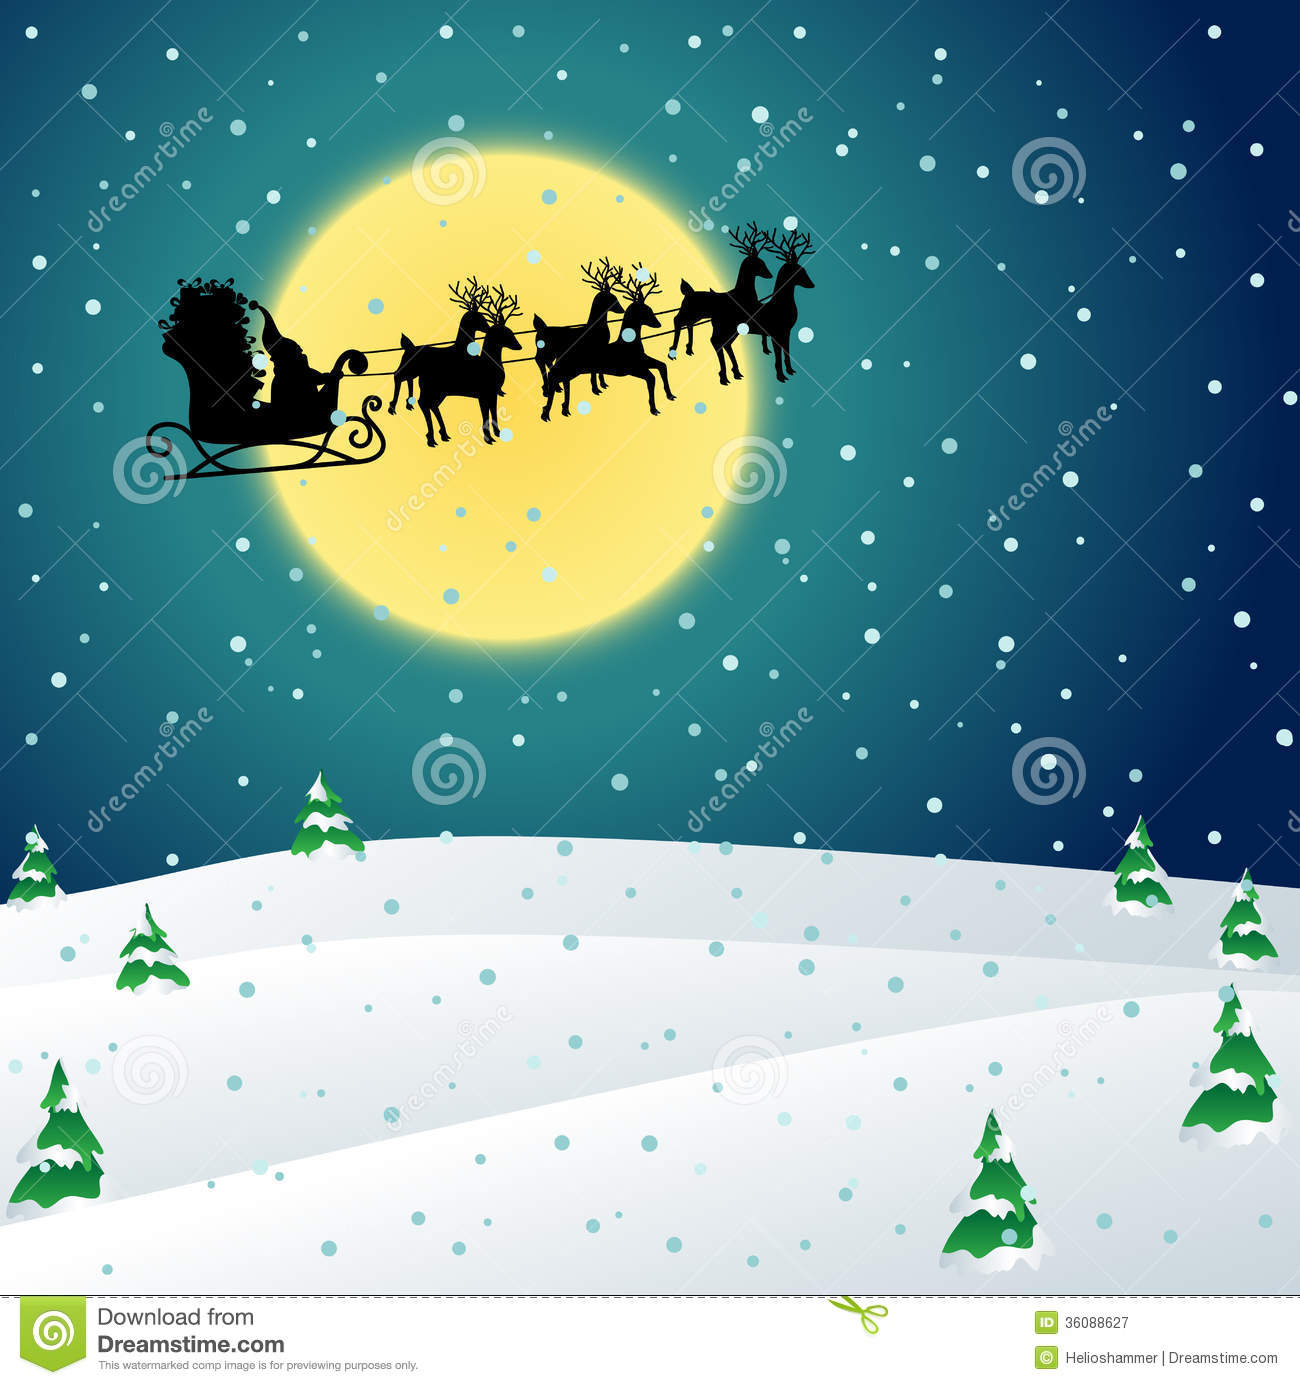 Winter Night With Santa Sleigh Royalty Free Stock Photography   Image